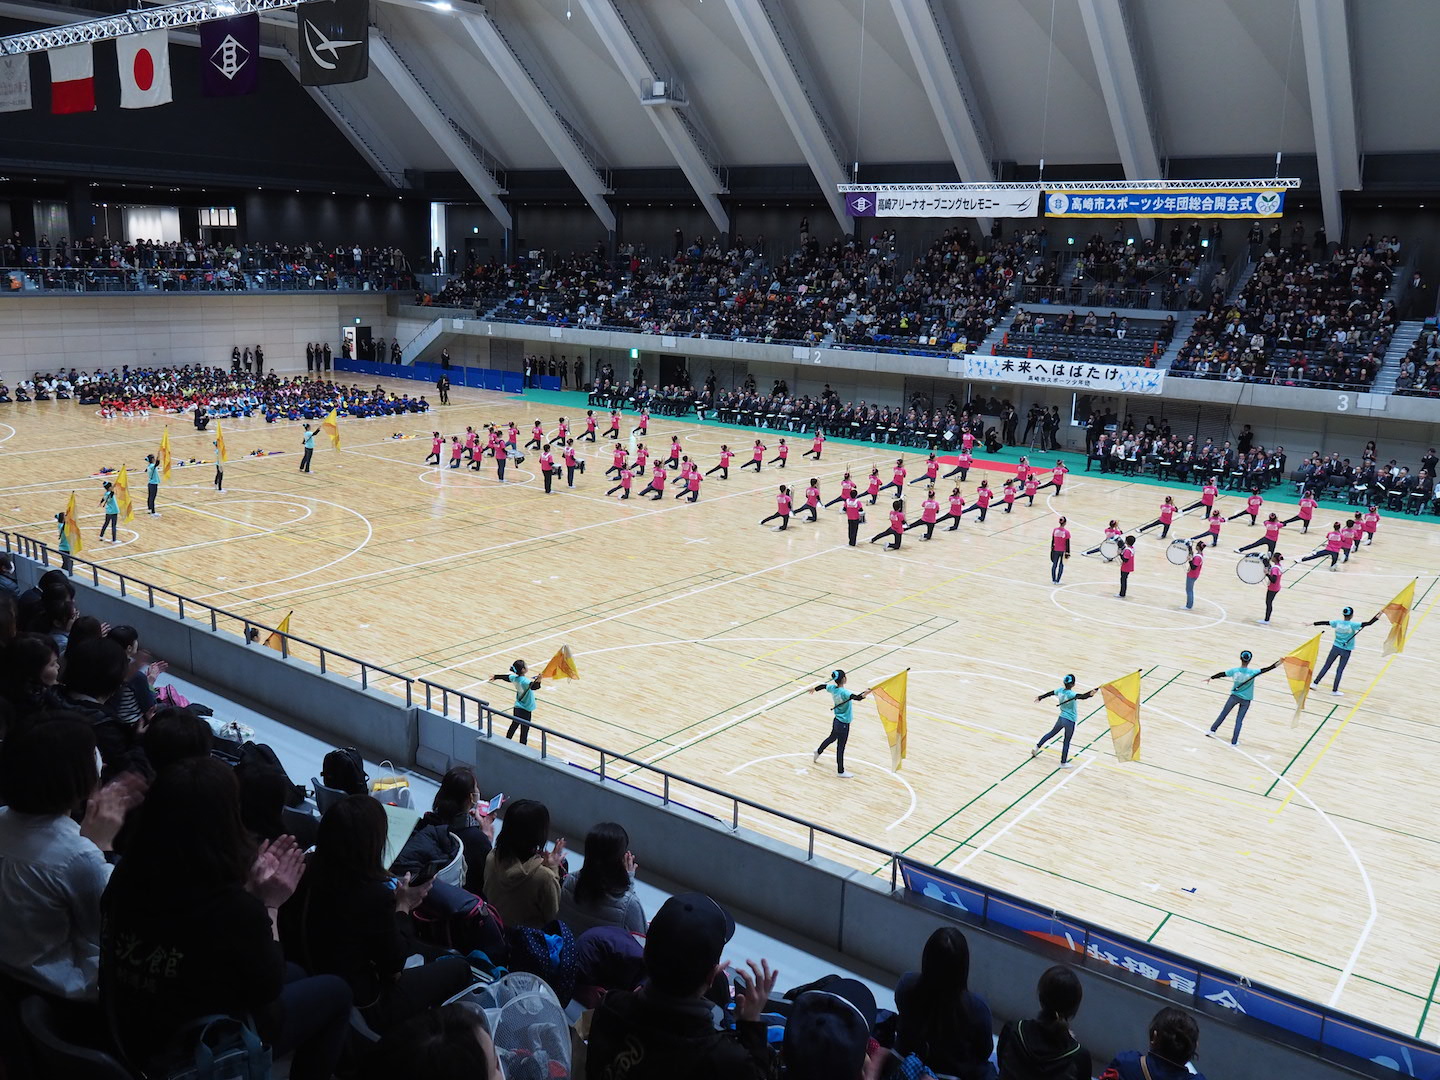 Takasaki Arena Opening Ceremony<br />Performed by<br />The Takasaki Technical Leaders Marching Band 3